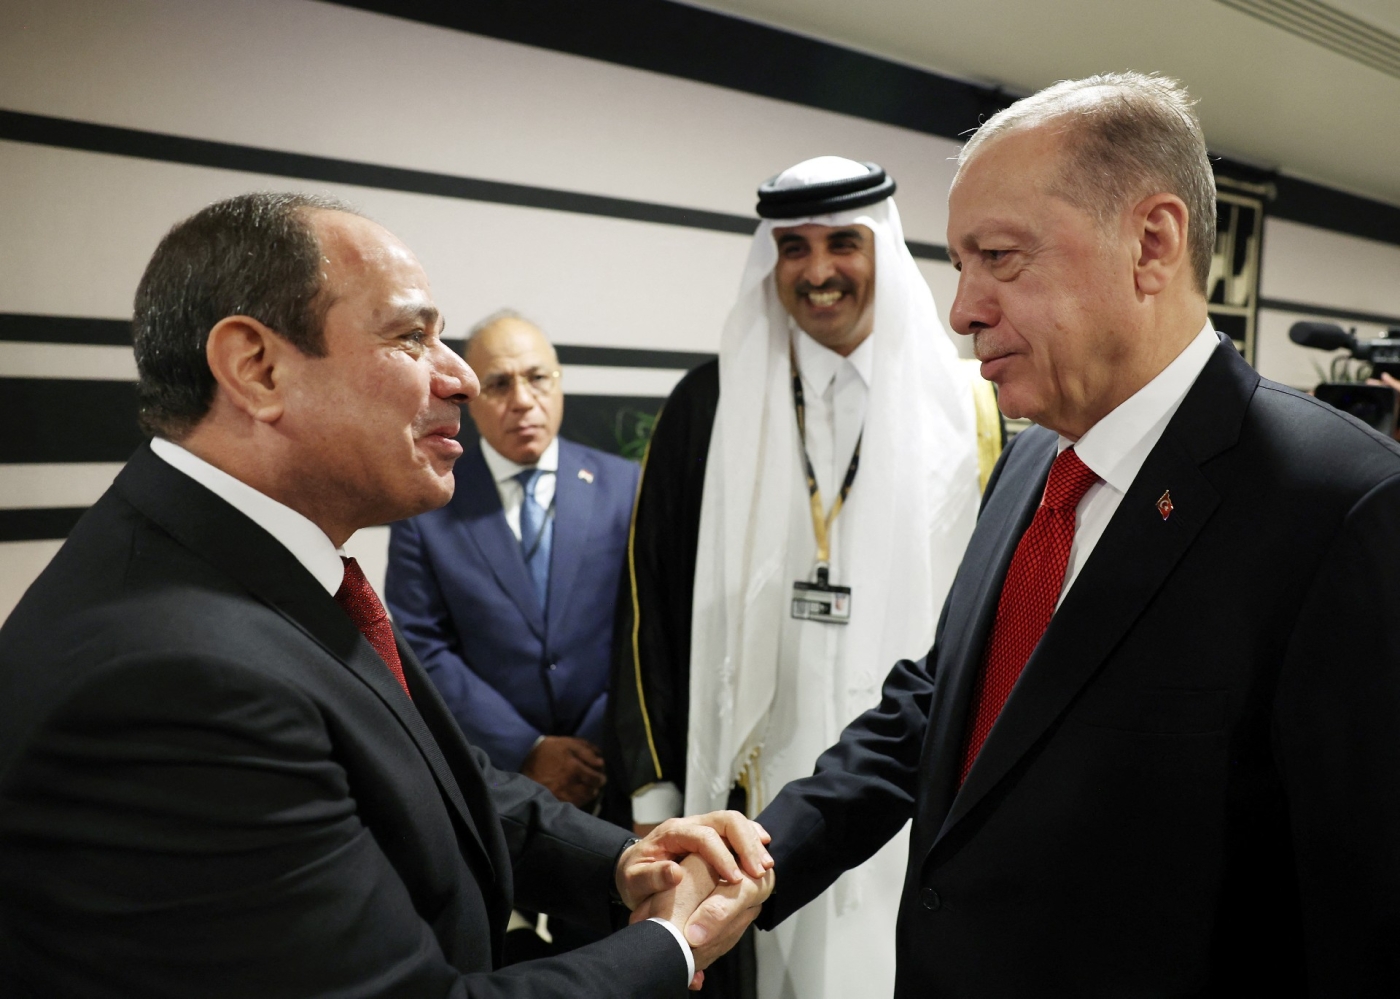 Turkey's President Recep Tayyip Erdogan shakes hands with his Egyptian counterpart Abdel Fattah el-Sisi on the sidelines of the World Cup opening ceremony in Doha (Reuters)